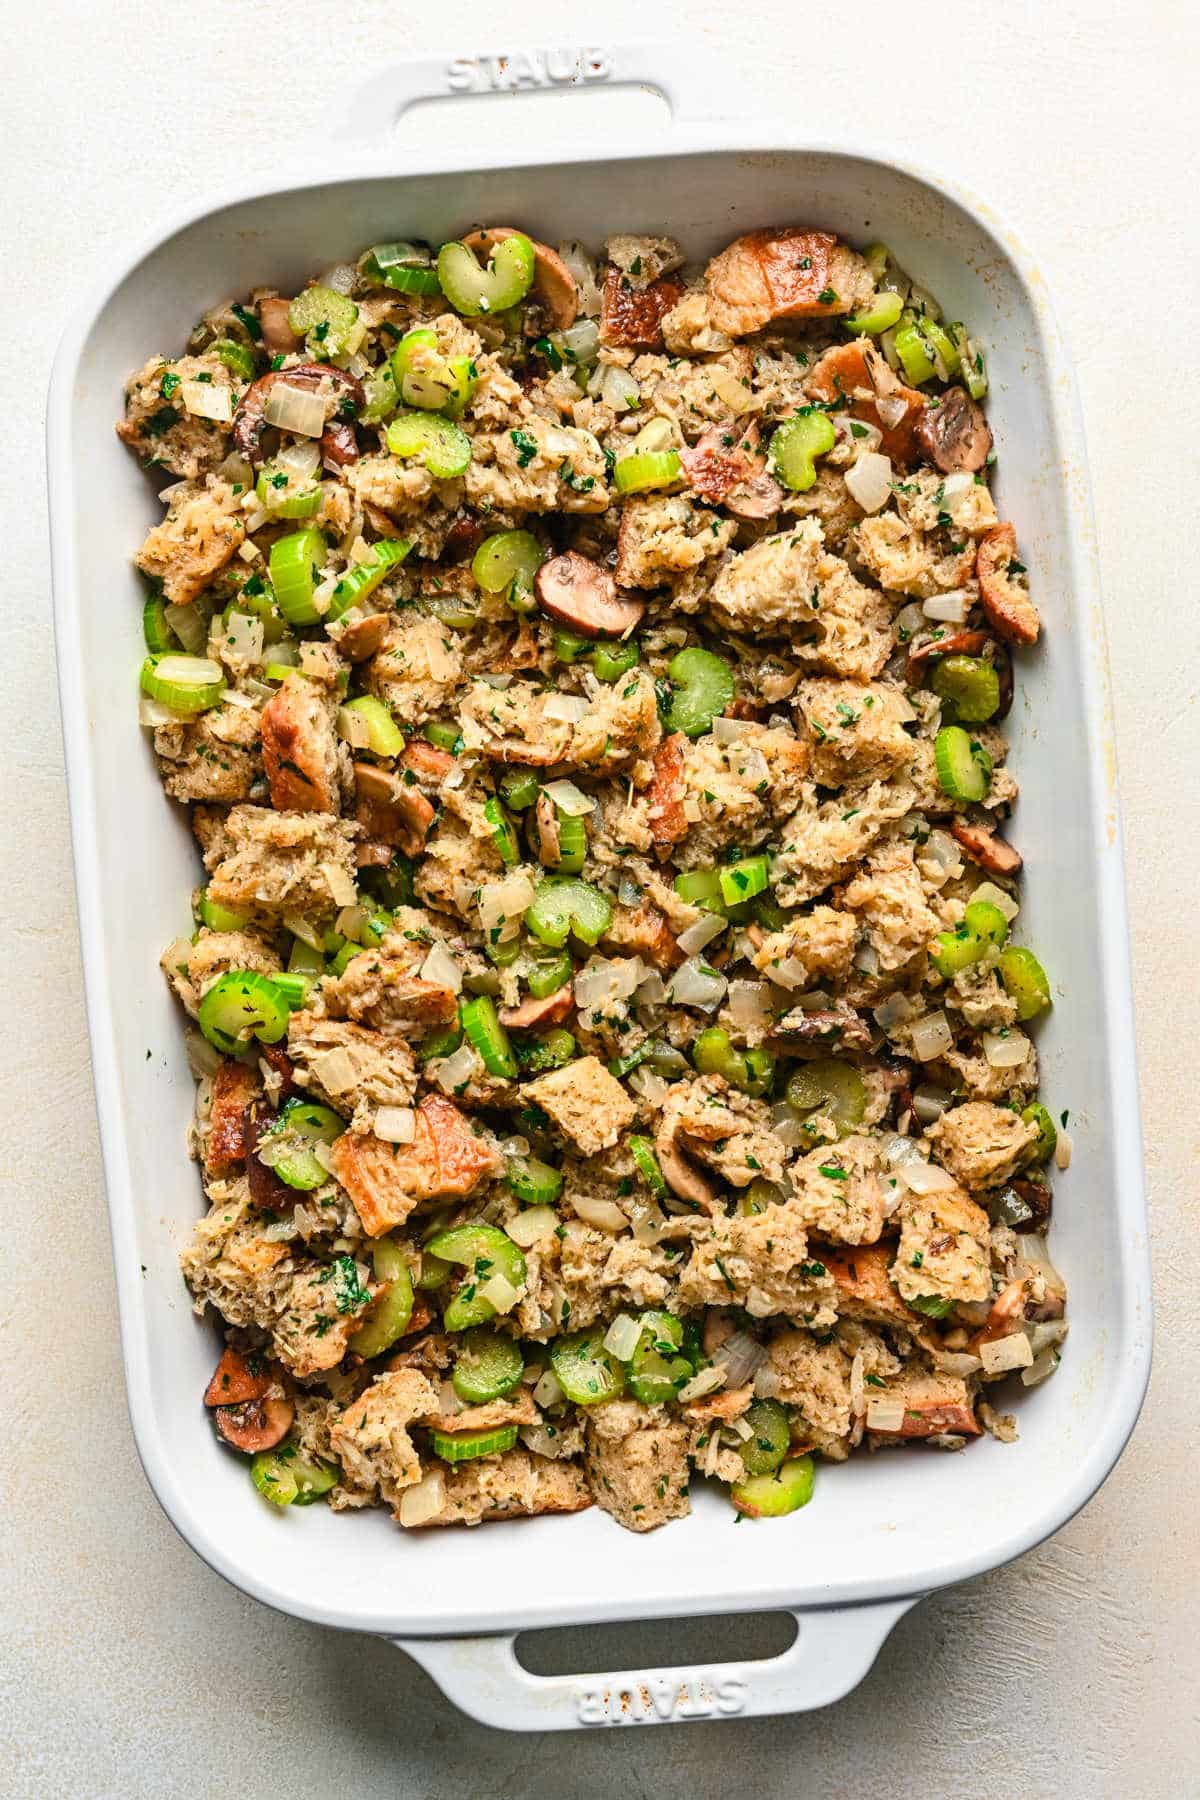 Unbaked stuffing in a white baking dish.